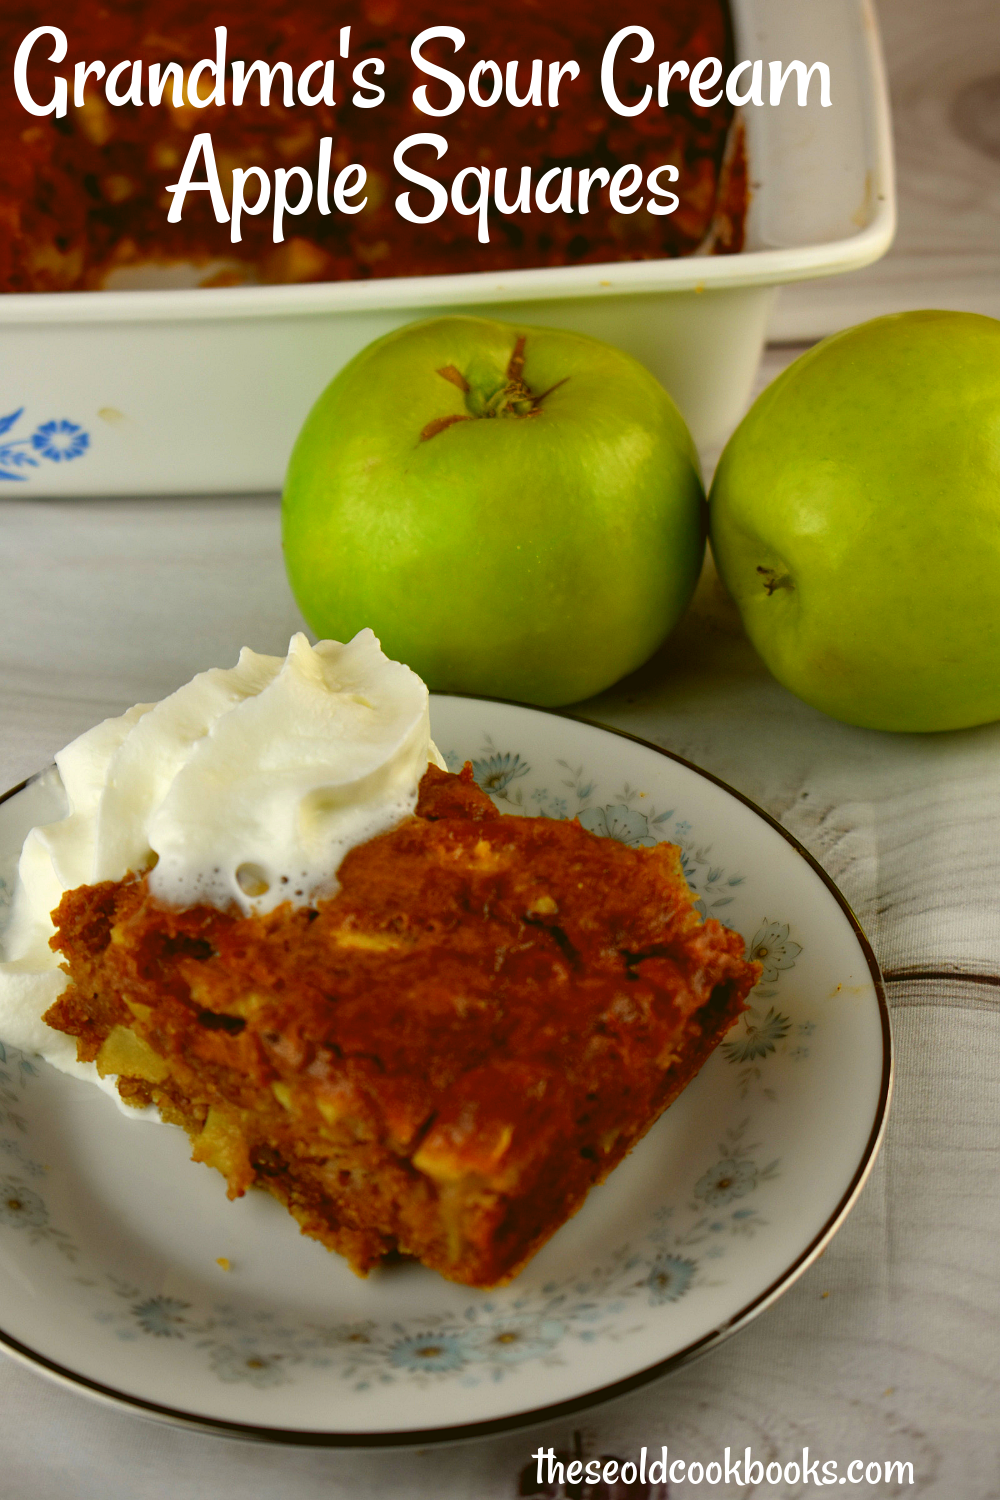 Grandma's Sour Cream Apple Squares is an old-fashioned dessert that will have your family begging for more.  These delicious bars have two layers including a creamy apple layer and a sweet brown sugar crust. Serve these with whipped cream just like our Grandma did.